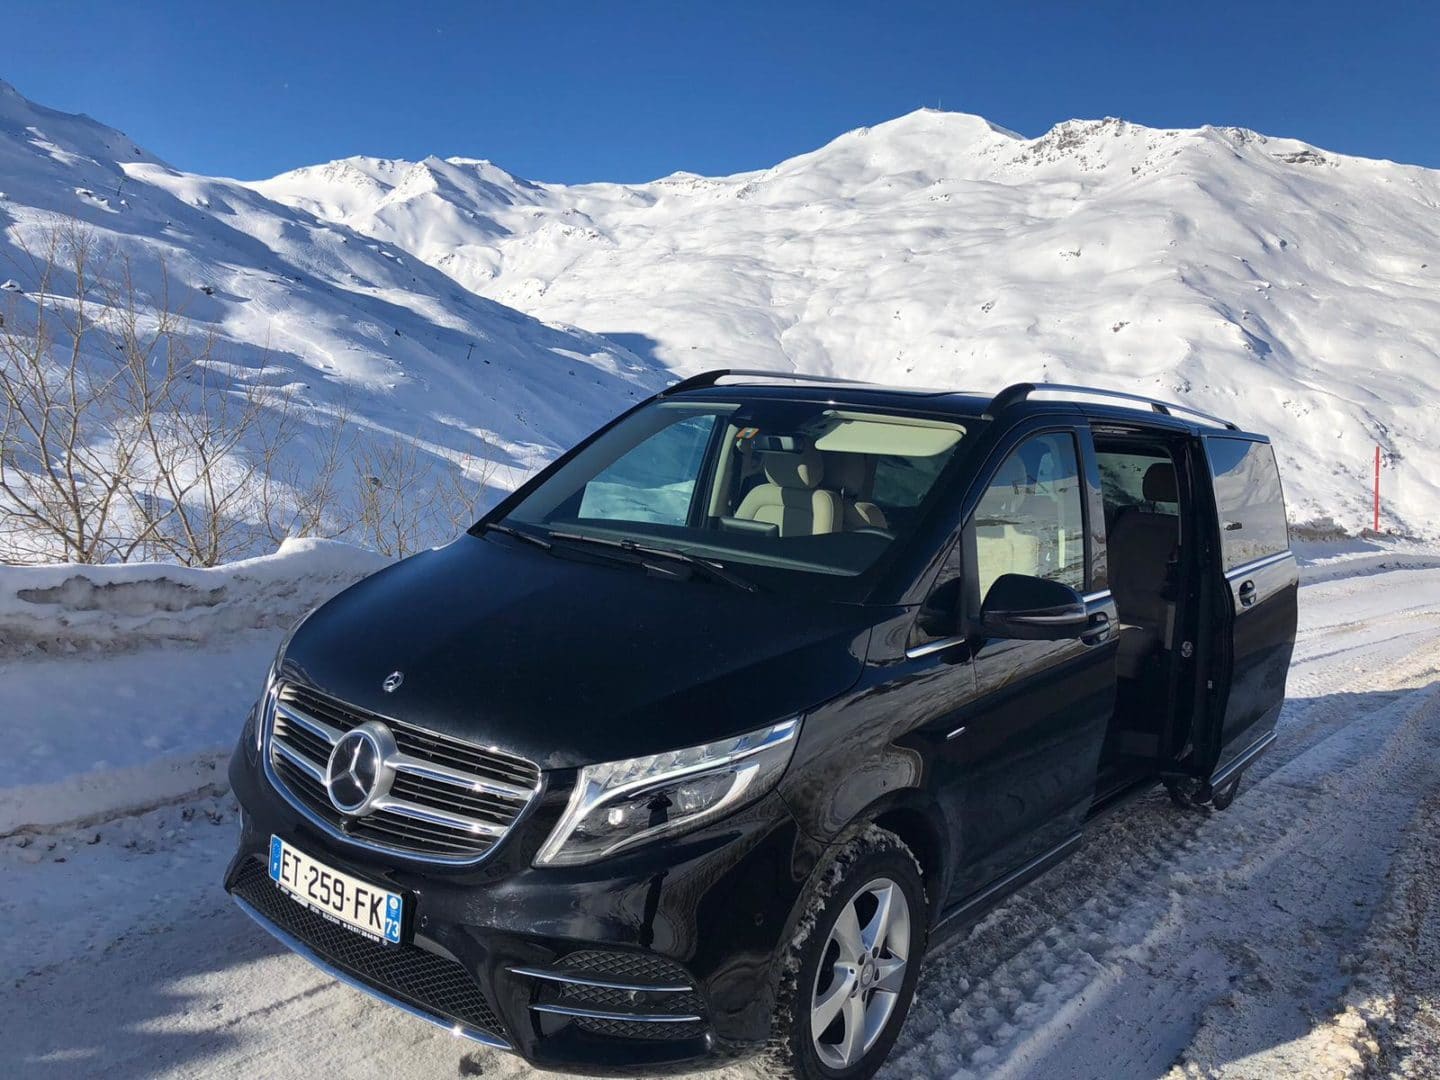 Chauffeur Services in Courcheval